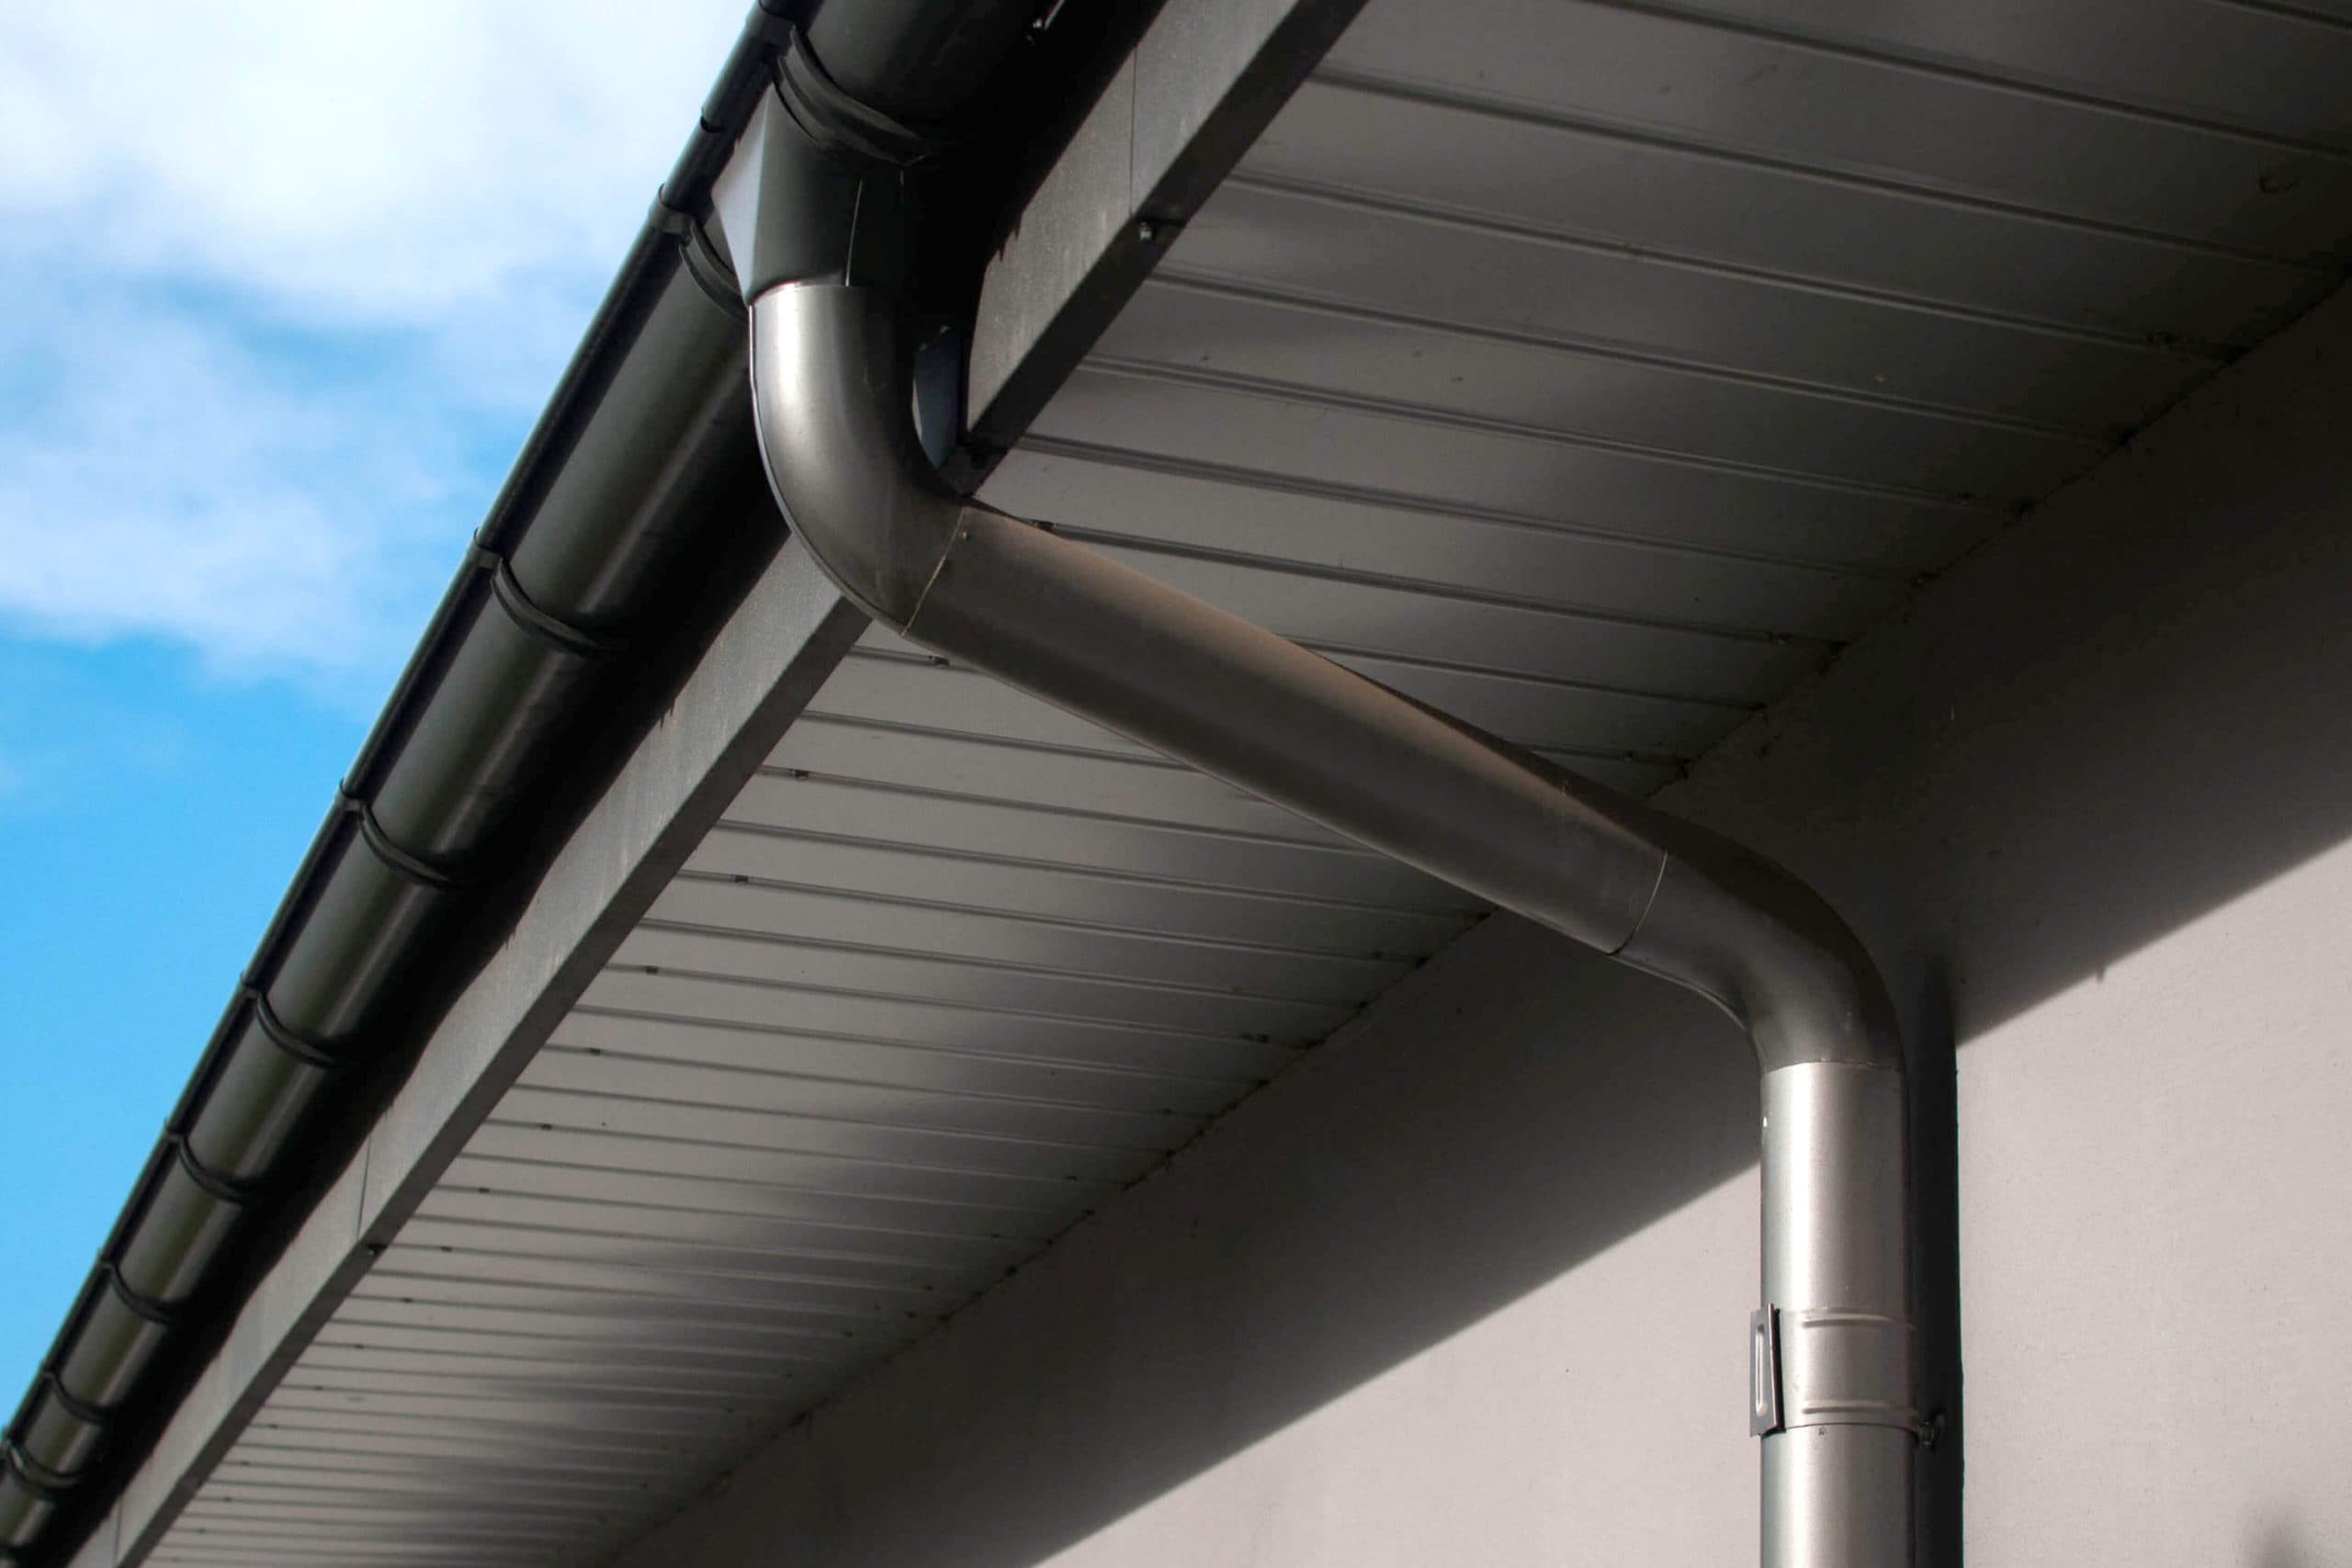 Reliable and affordable Galvanized gutters installation in Fort Worth